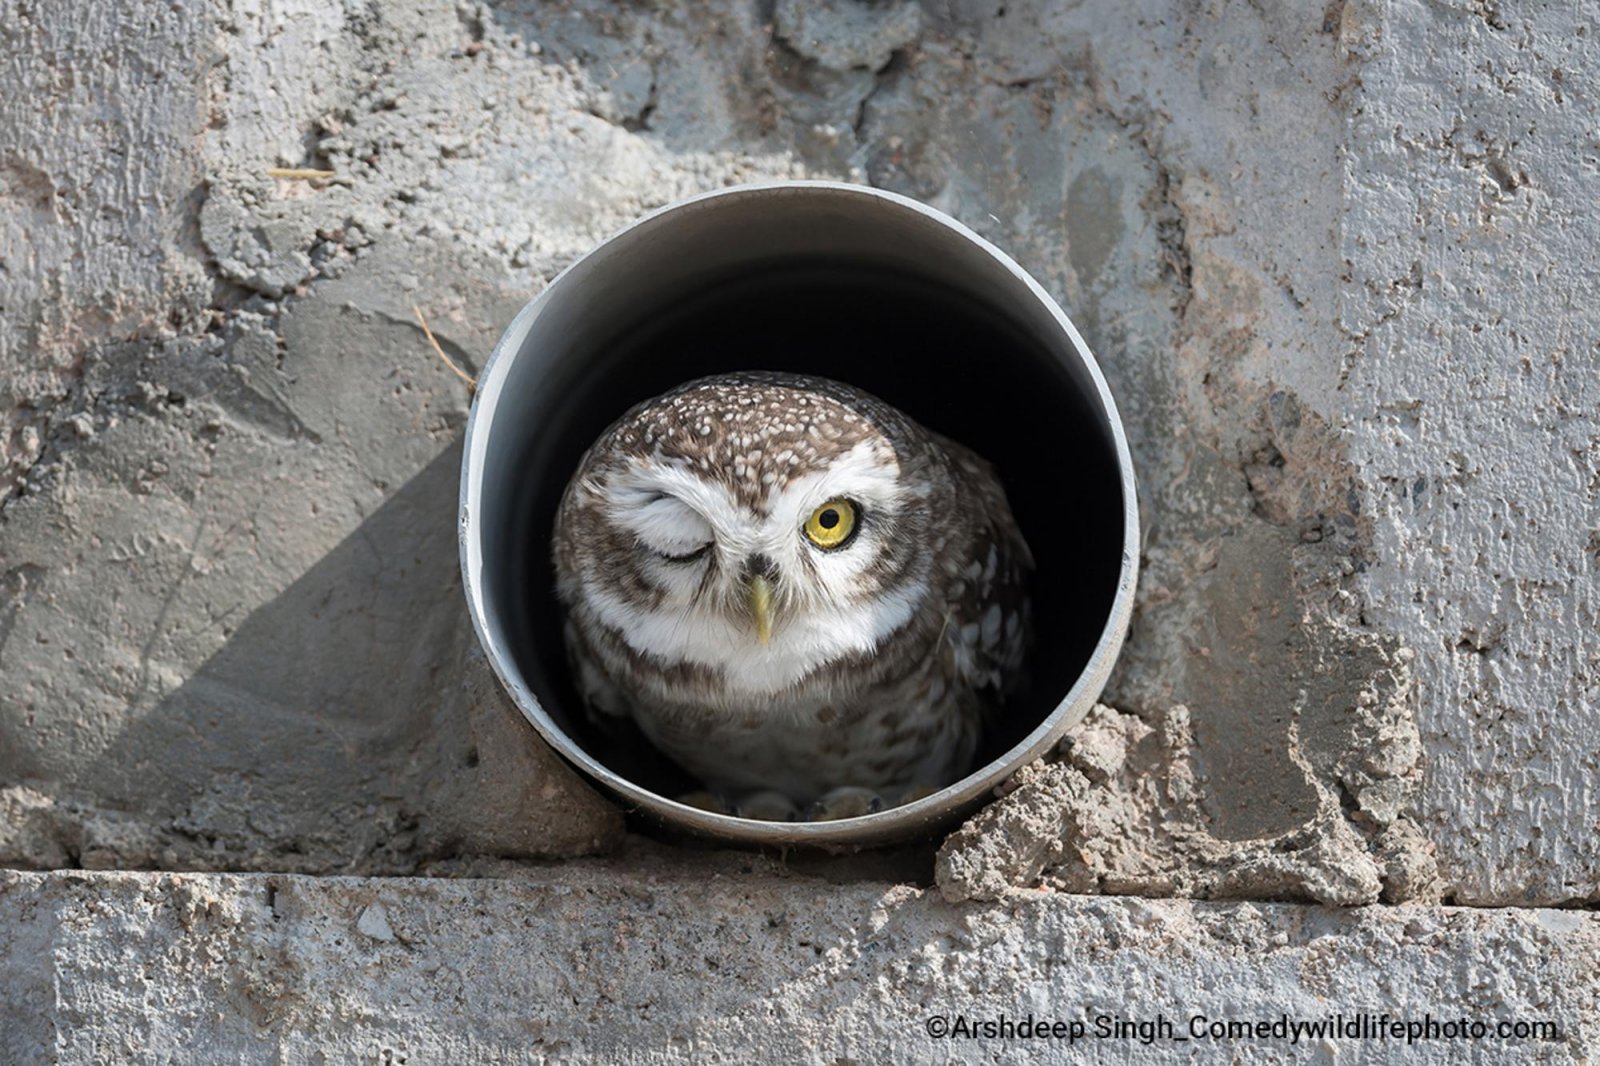 A grey owl sits with one yellow eye opened staring  at the camera from a drain pipe coming out from a concrete wall.